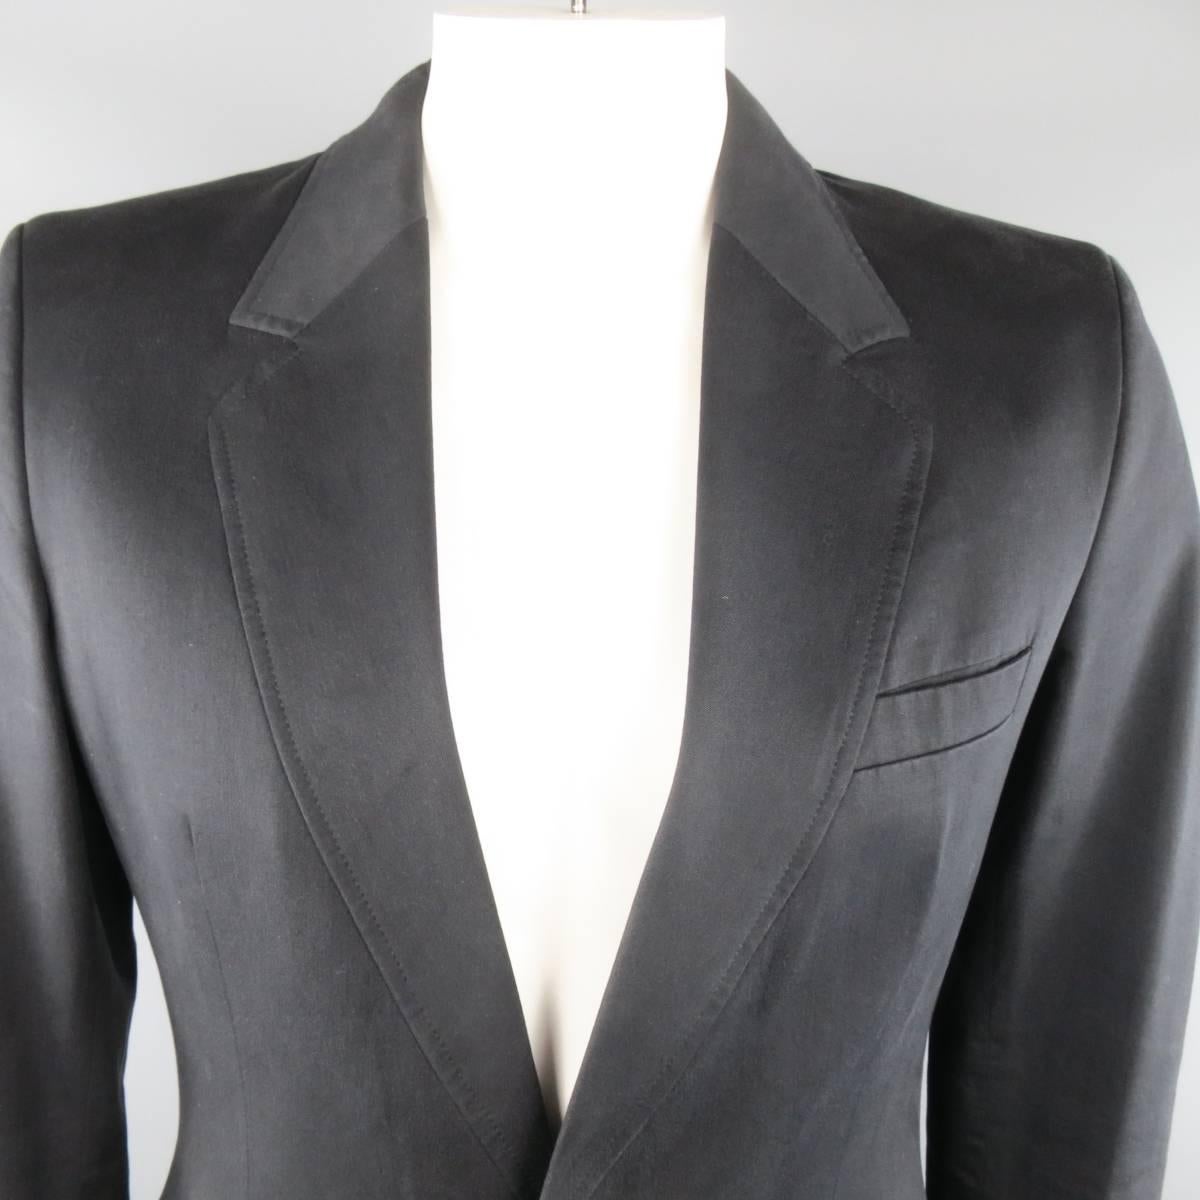 MAISON MARTIN MARGIELA sport coat comes in a soft black cotton blend twill chino fabric and features a sewn down, flat notch lapel, single hidden hook closure with simulated buttons, and simulated button cuffs. Made in Italy.
 
Excellent Pre-Owned